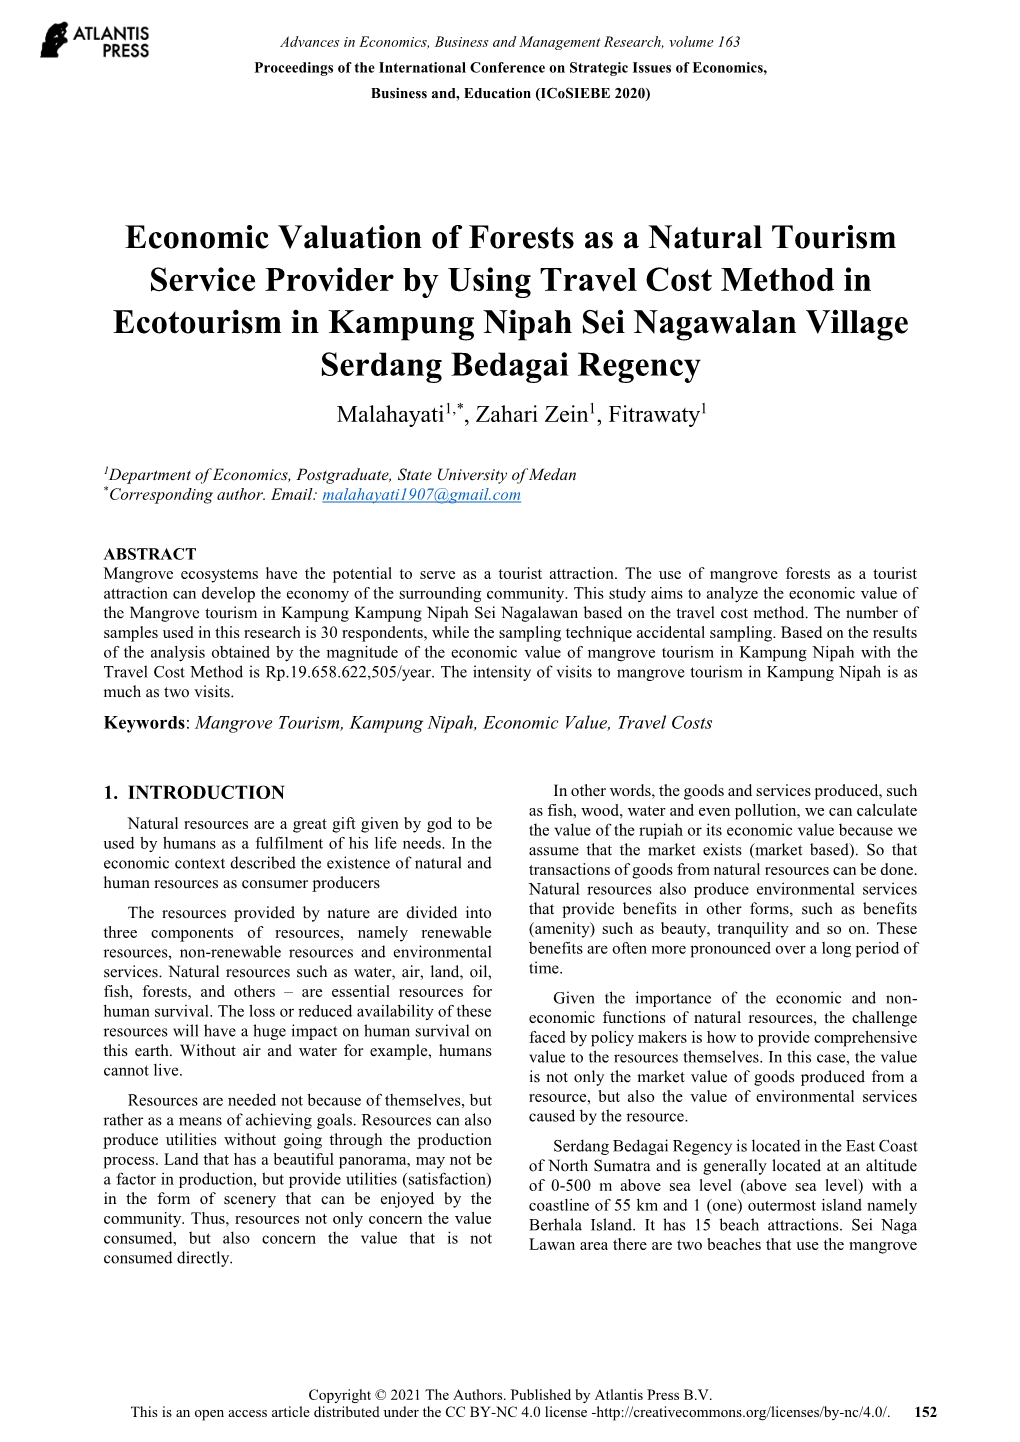 Economic Valuation of Forests As a Natural Tourism Service Provider